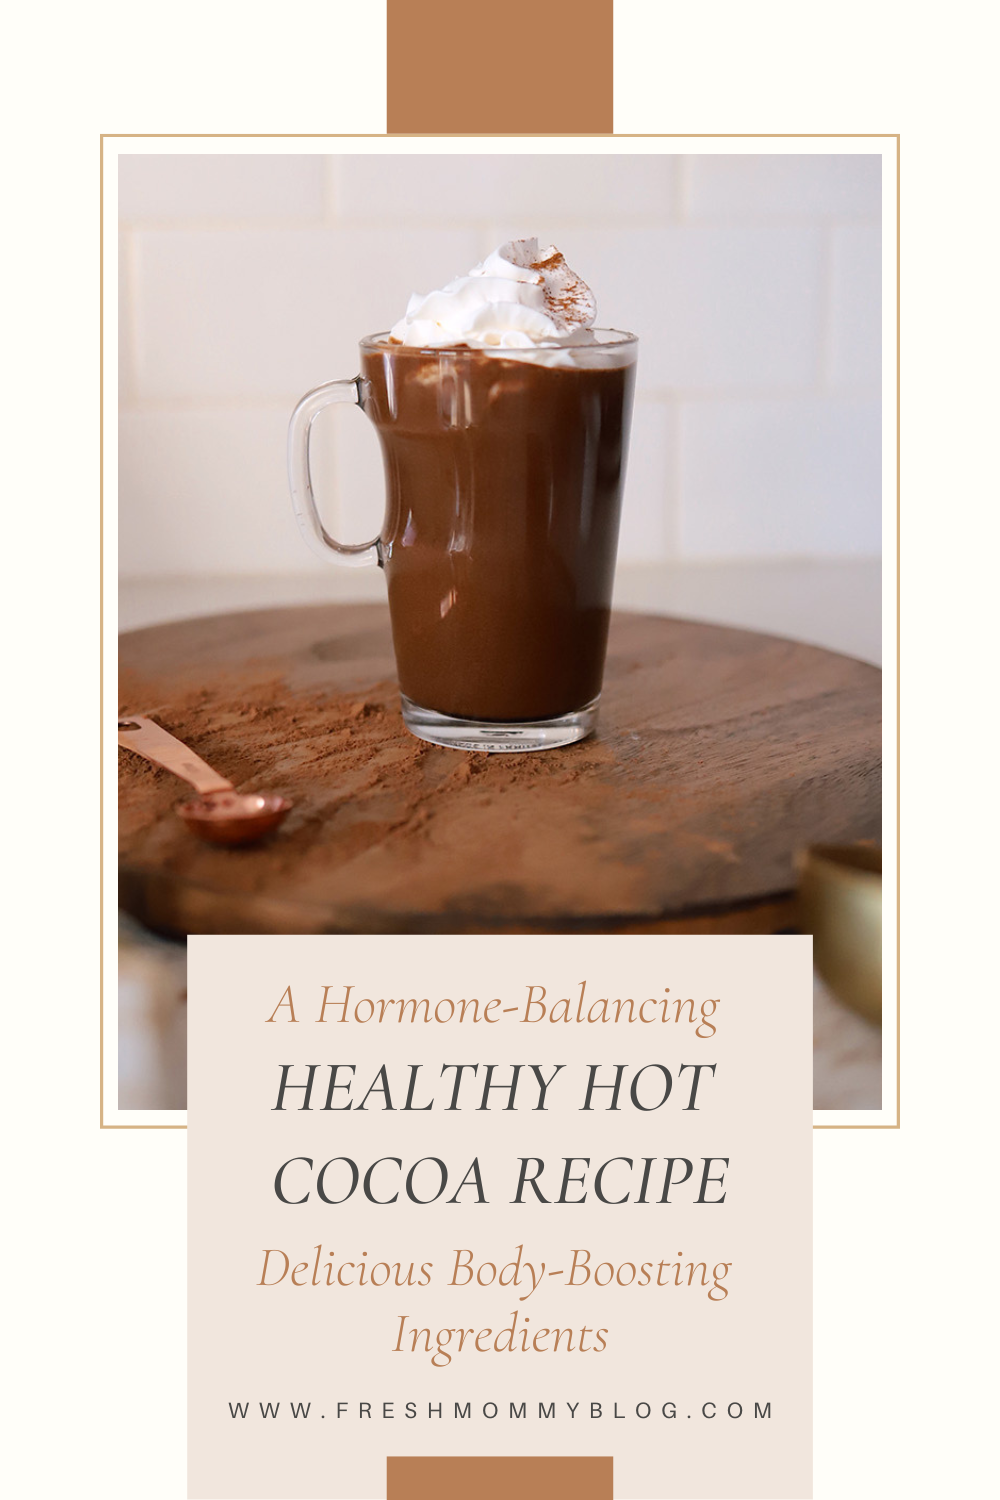 A Hormone-Balancing, Healthy Hot Cocoa Recipe with Delicious, Body-Boosting Ingredients